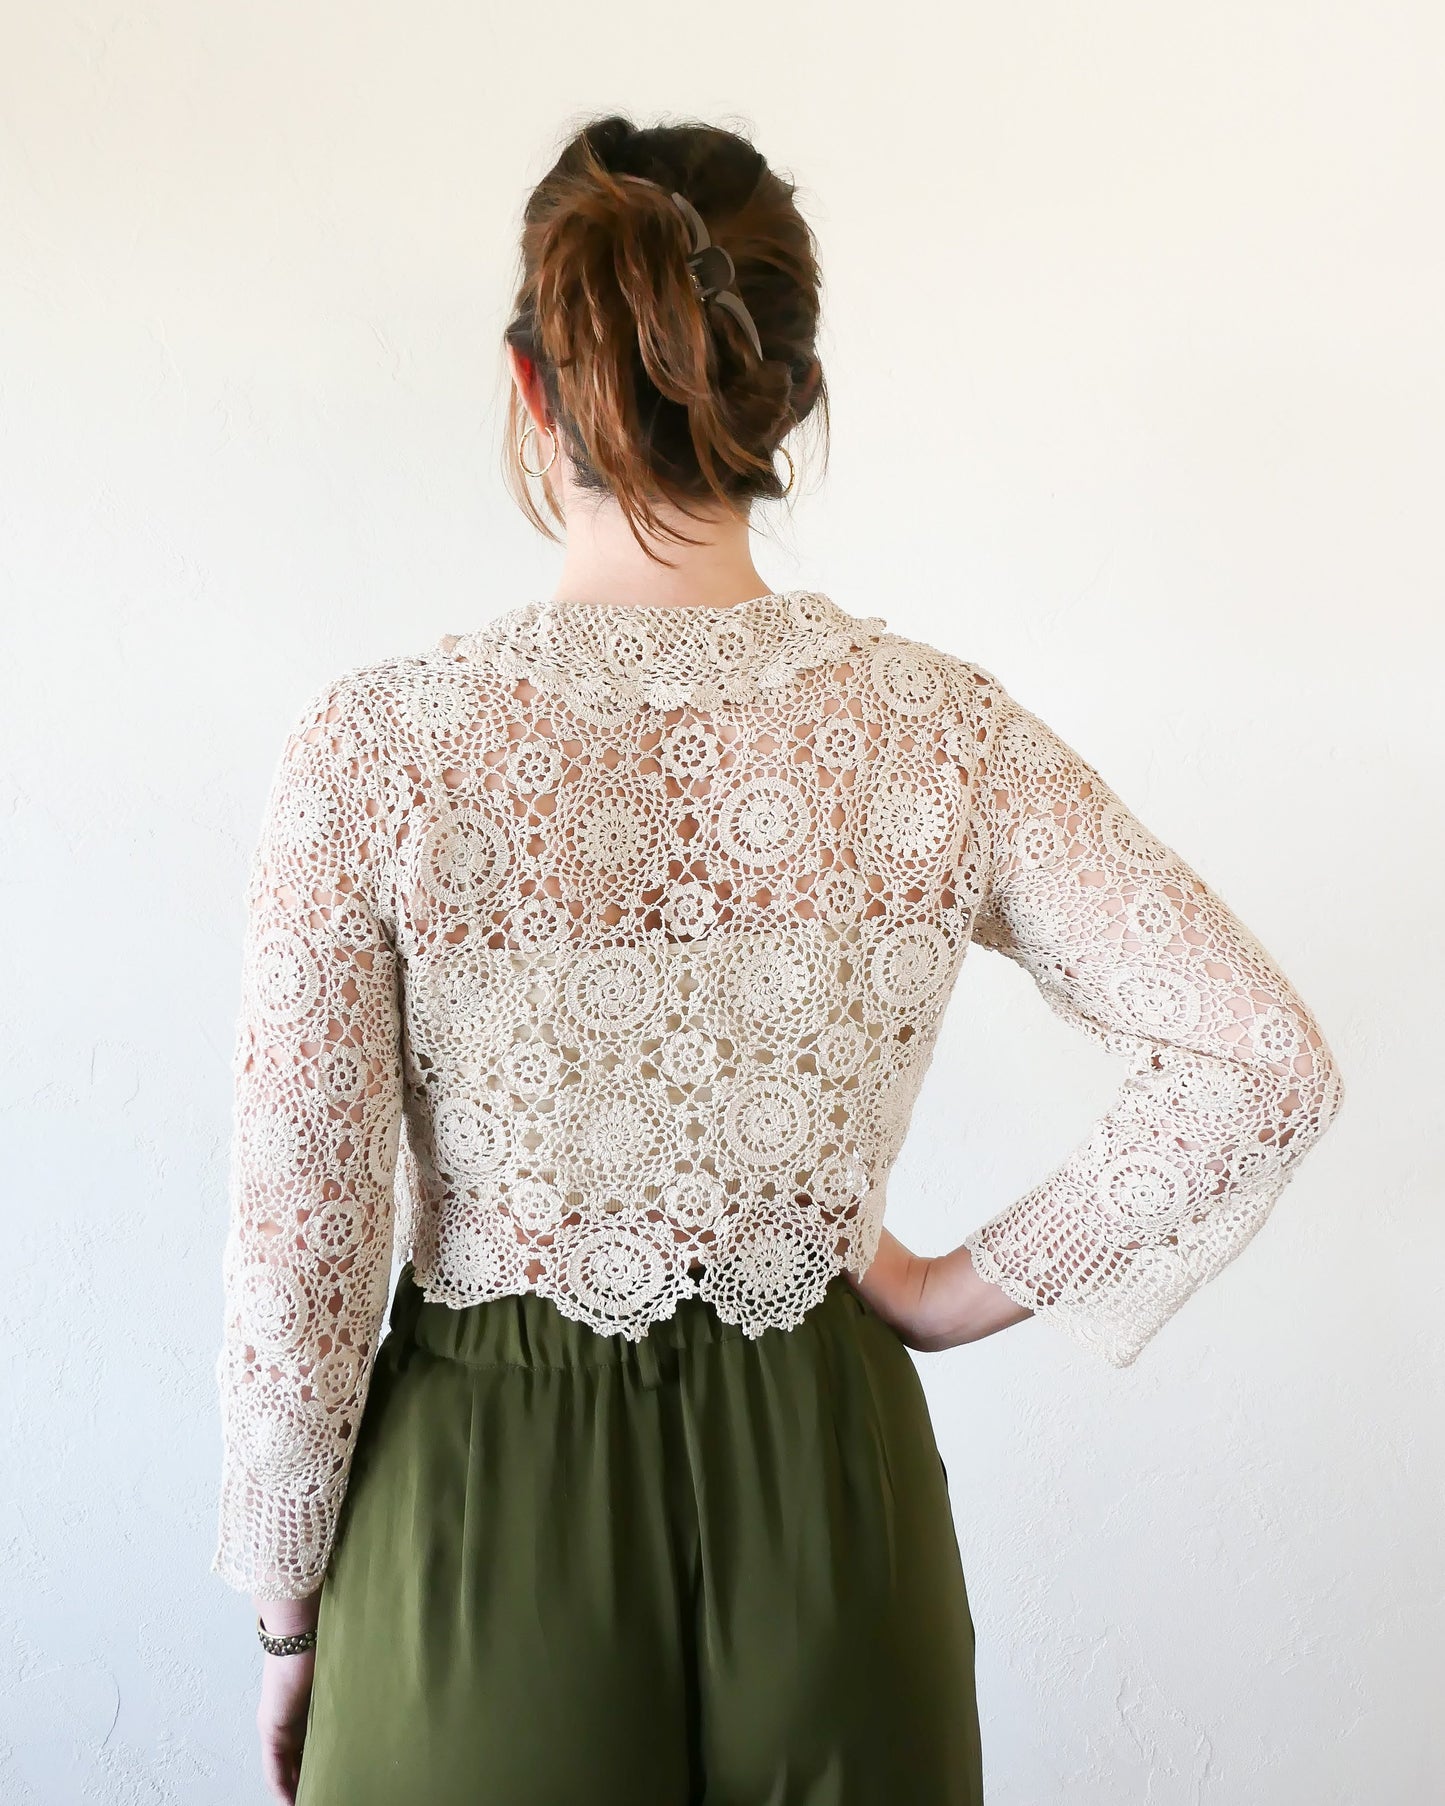 Back view of natural colored crochet cropped cardigan. A versatile and boho chic hand crocheted cropped cardigan sweater with a unique, repeating kaleidoscope-like floral pattern throughout. Dress it down with a pair of jeans and sandals, or dress it up with neutral colored wide leg pants, heels, and a pair of vintage dangly earrings.